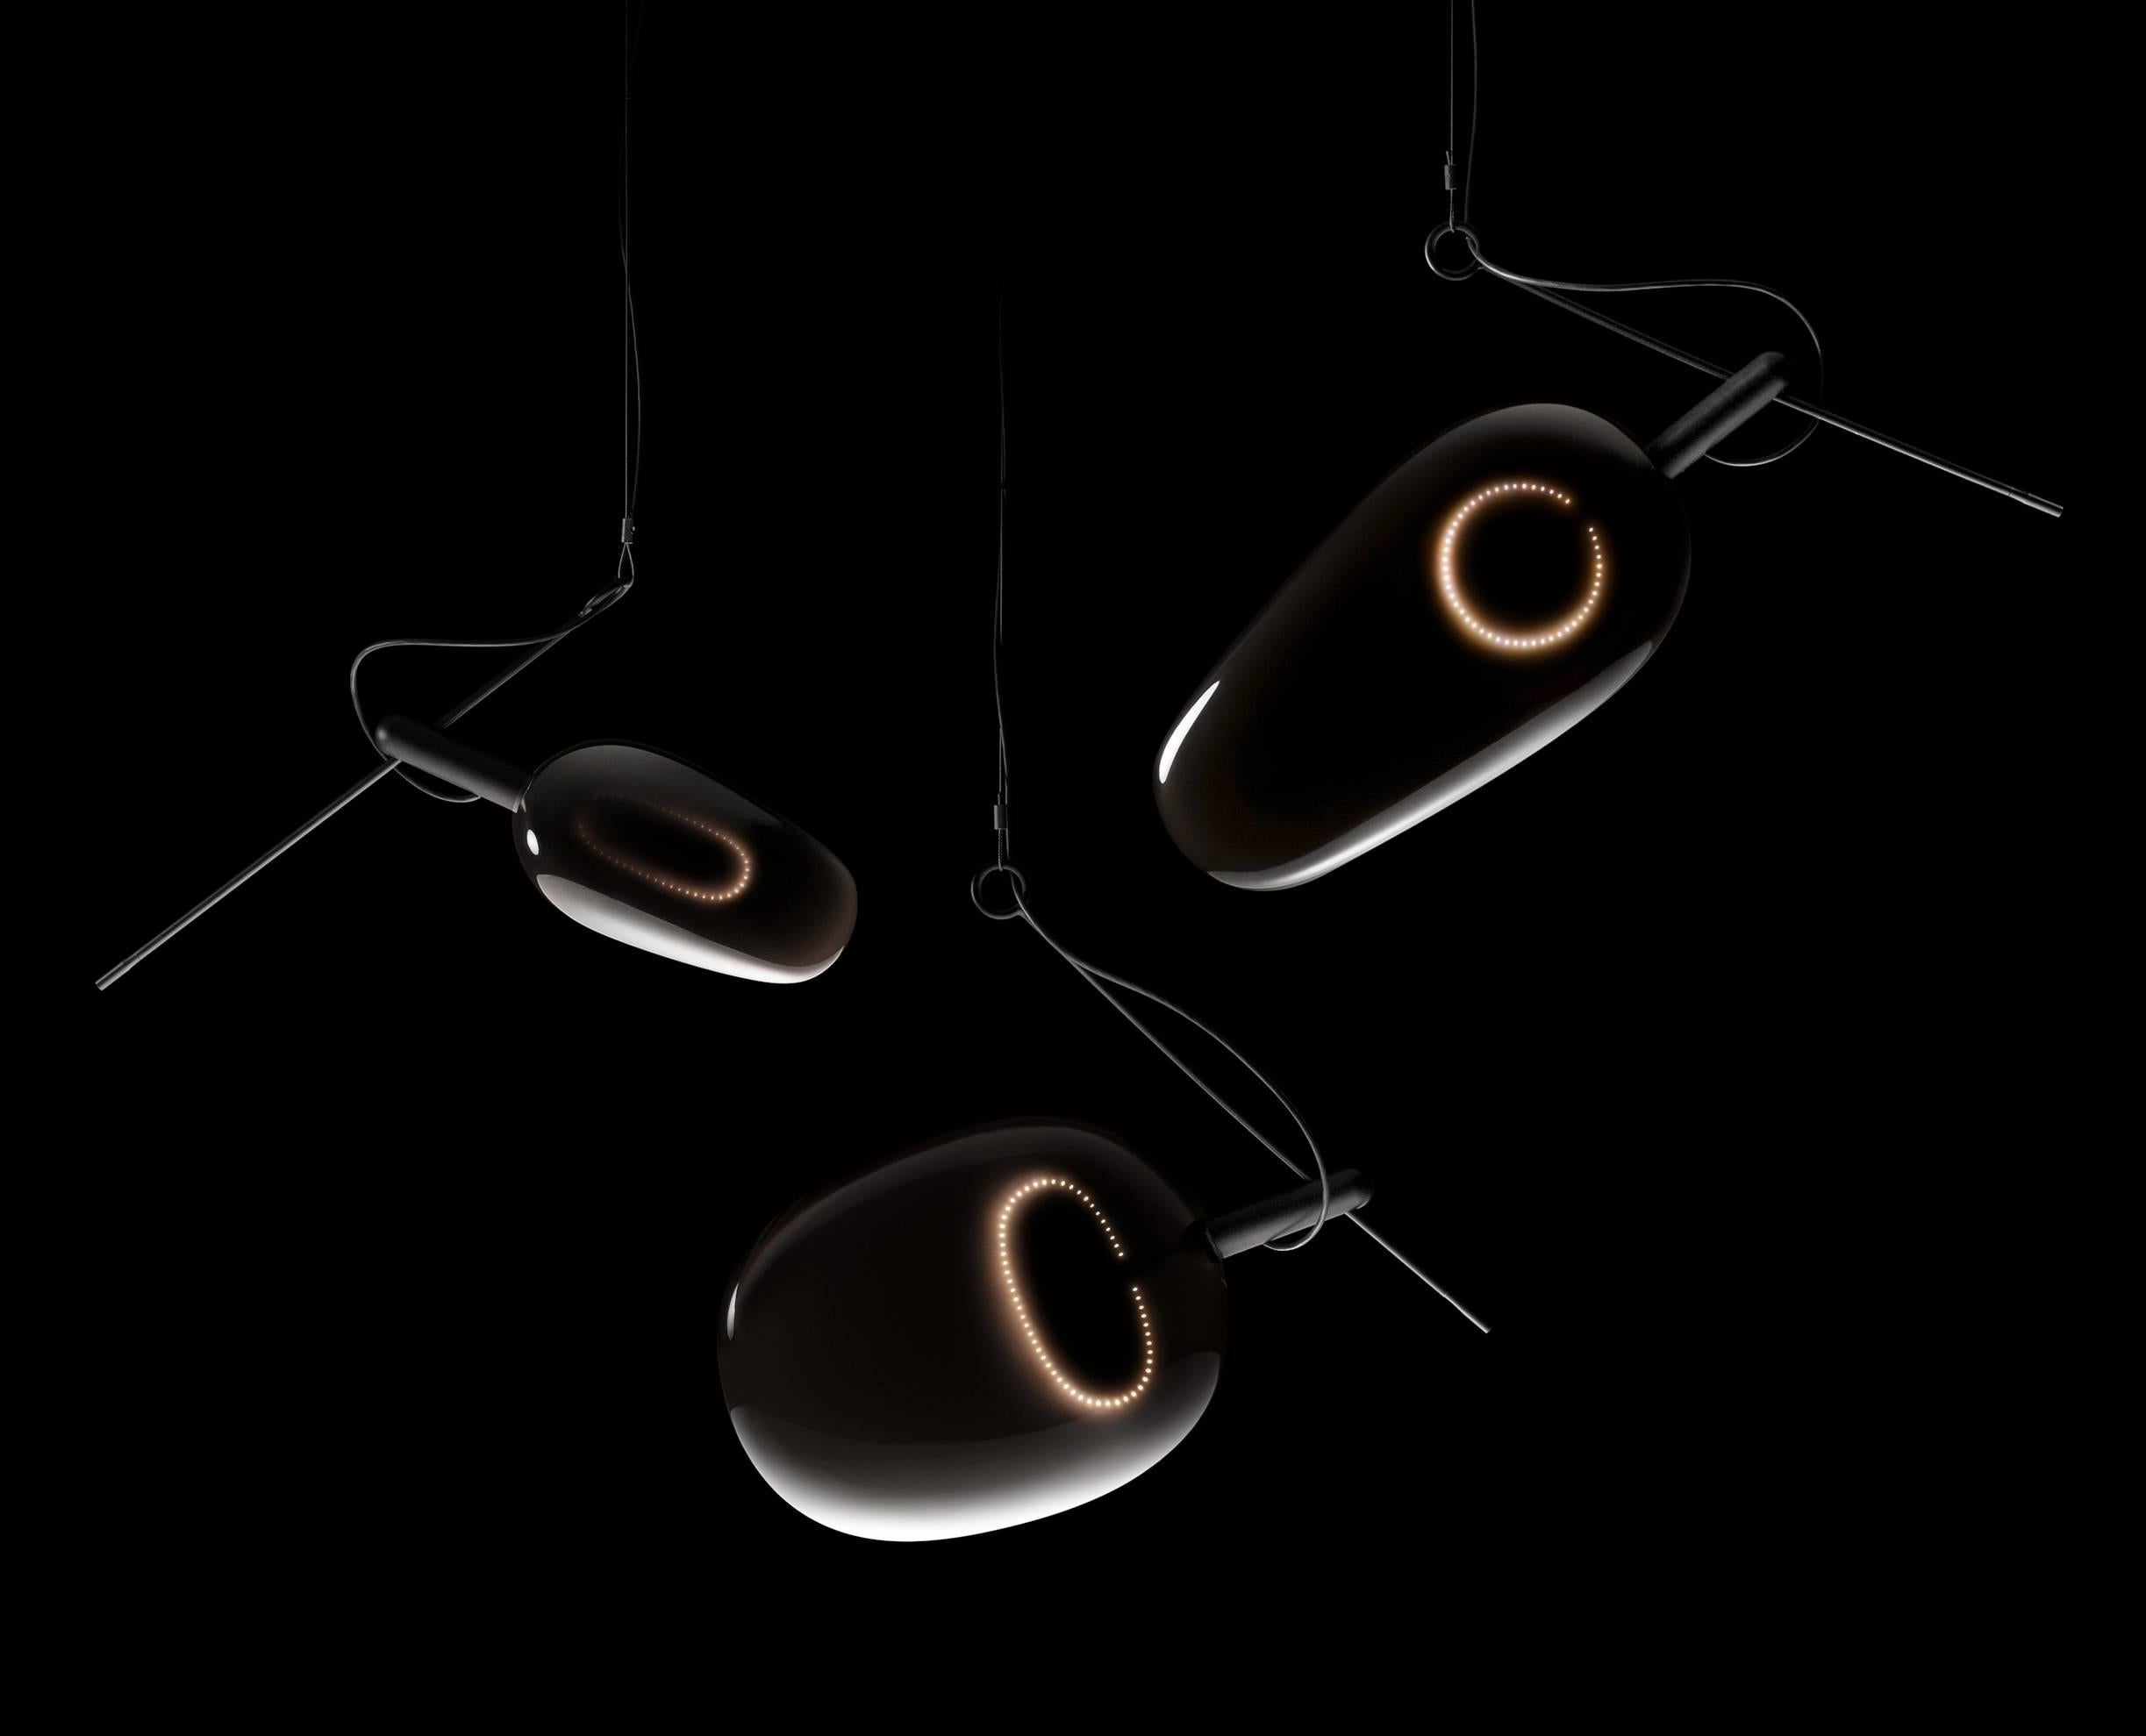 Amber is a pendant lamp in which a LED circuit board is embedded in colored resin. The color of light, reminiscent of a gentle flame, melts into the surrounding black creating a smooth gradation.